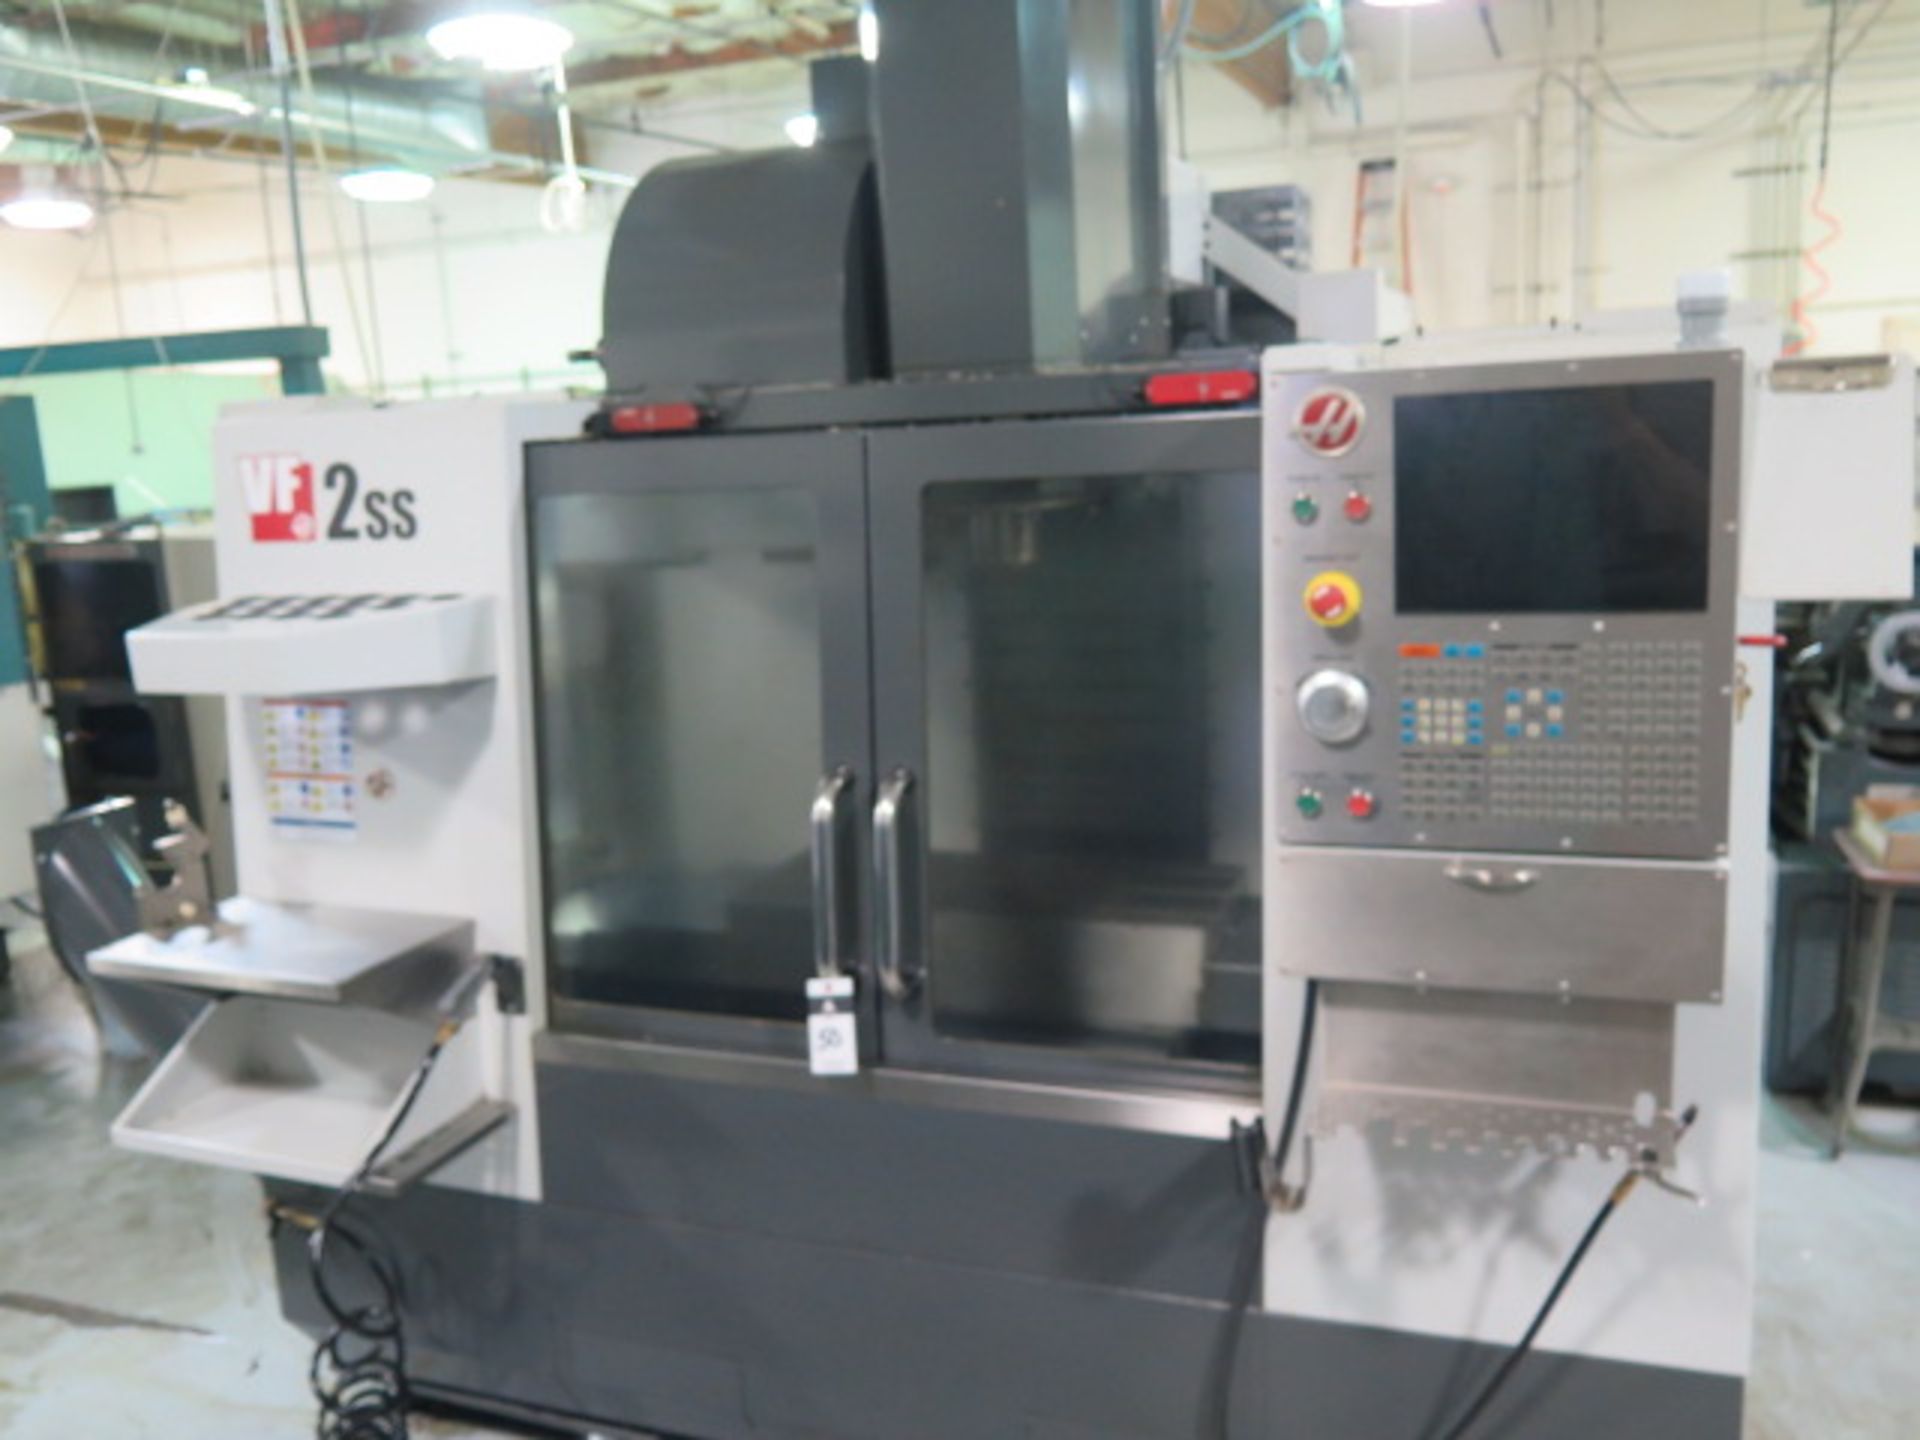 DEC 2014 Haas VF-2SS 4-Axis CNC Vertical Machining Center s/n 1118738 w/ Haas Controls, 24-Station - Image 3 of 13